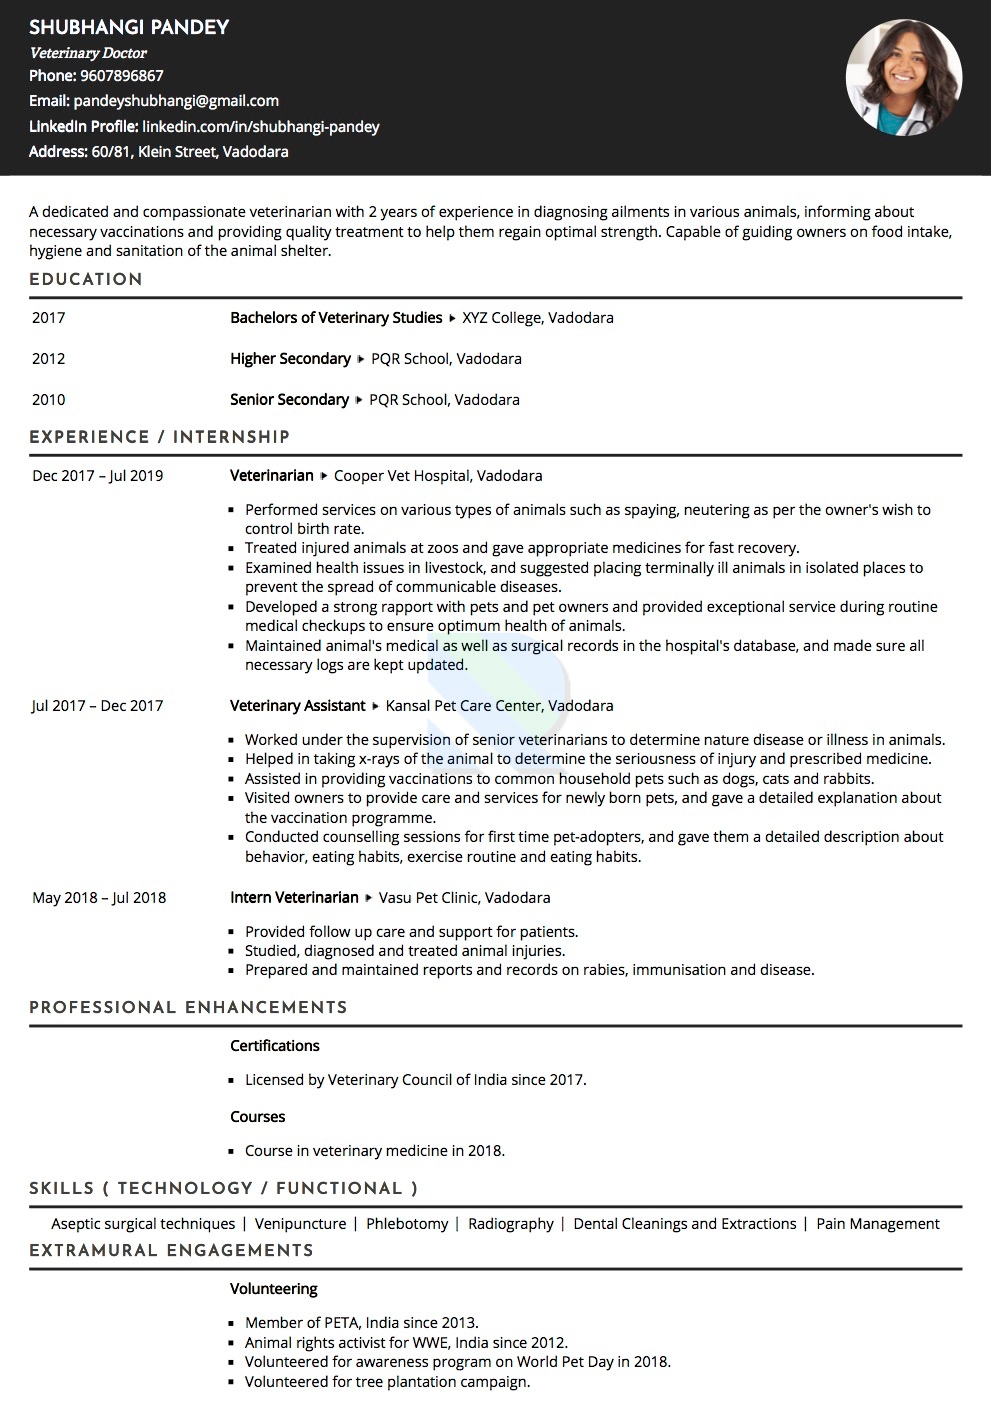 Sample Resume of Veterinary Doctor  | Free Resume Templates & Samples on Resumod.co